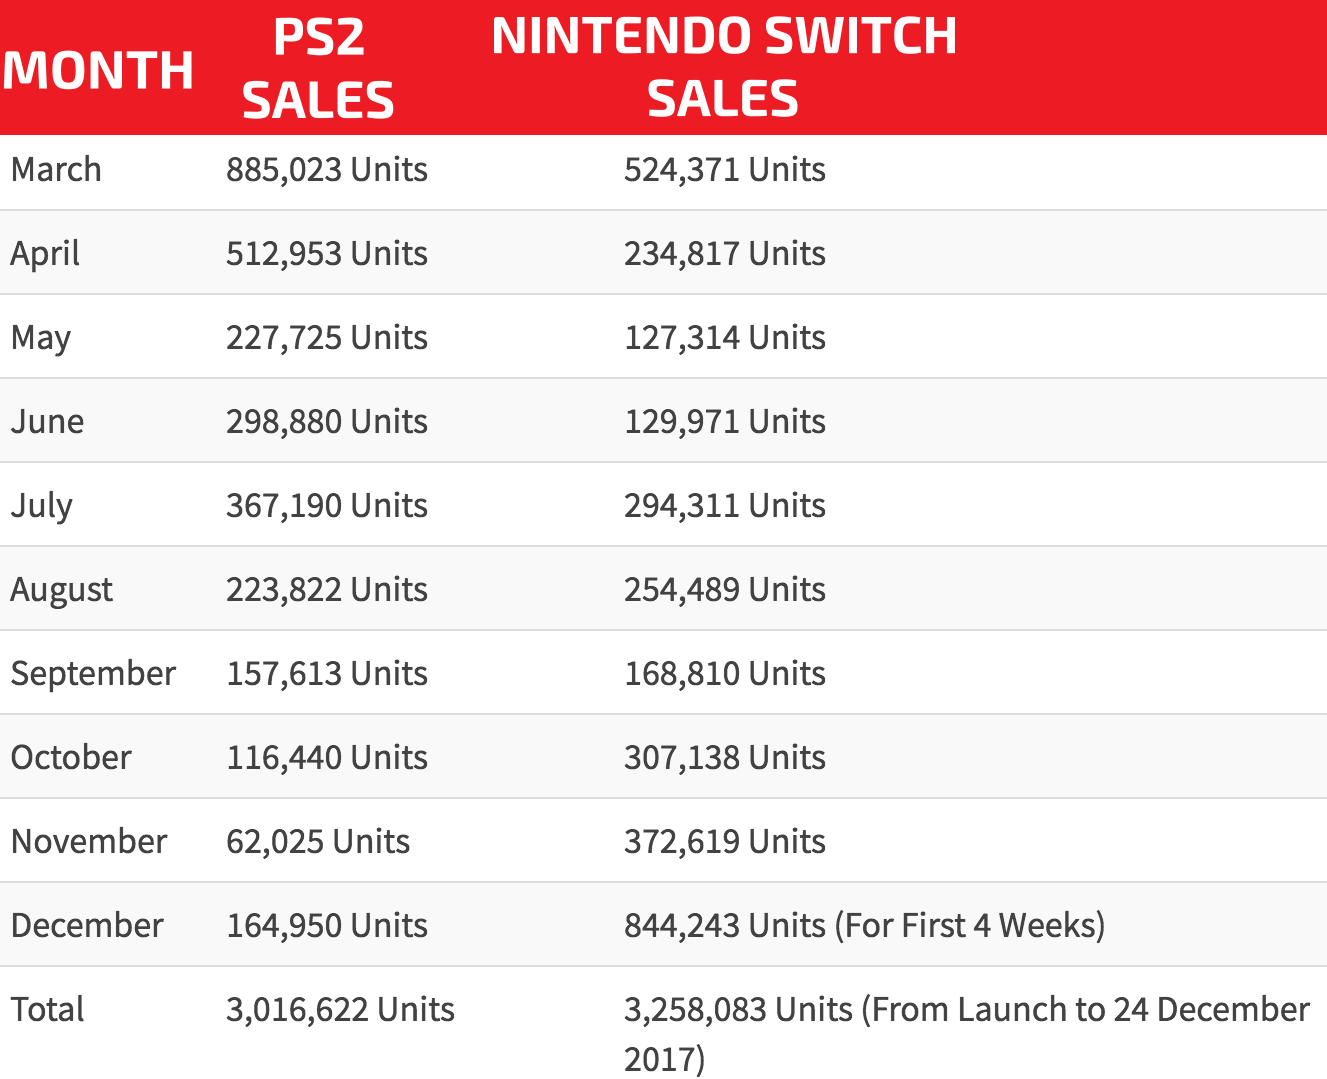 Nintendo Switch surpasses PS2's first 10-month sales numbers in Japan